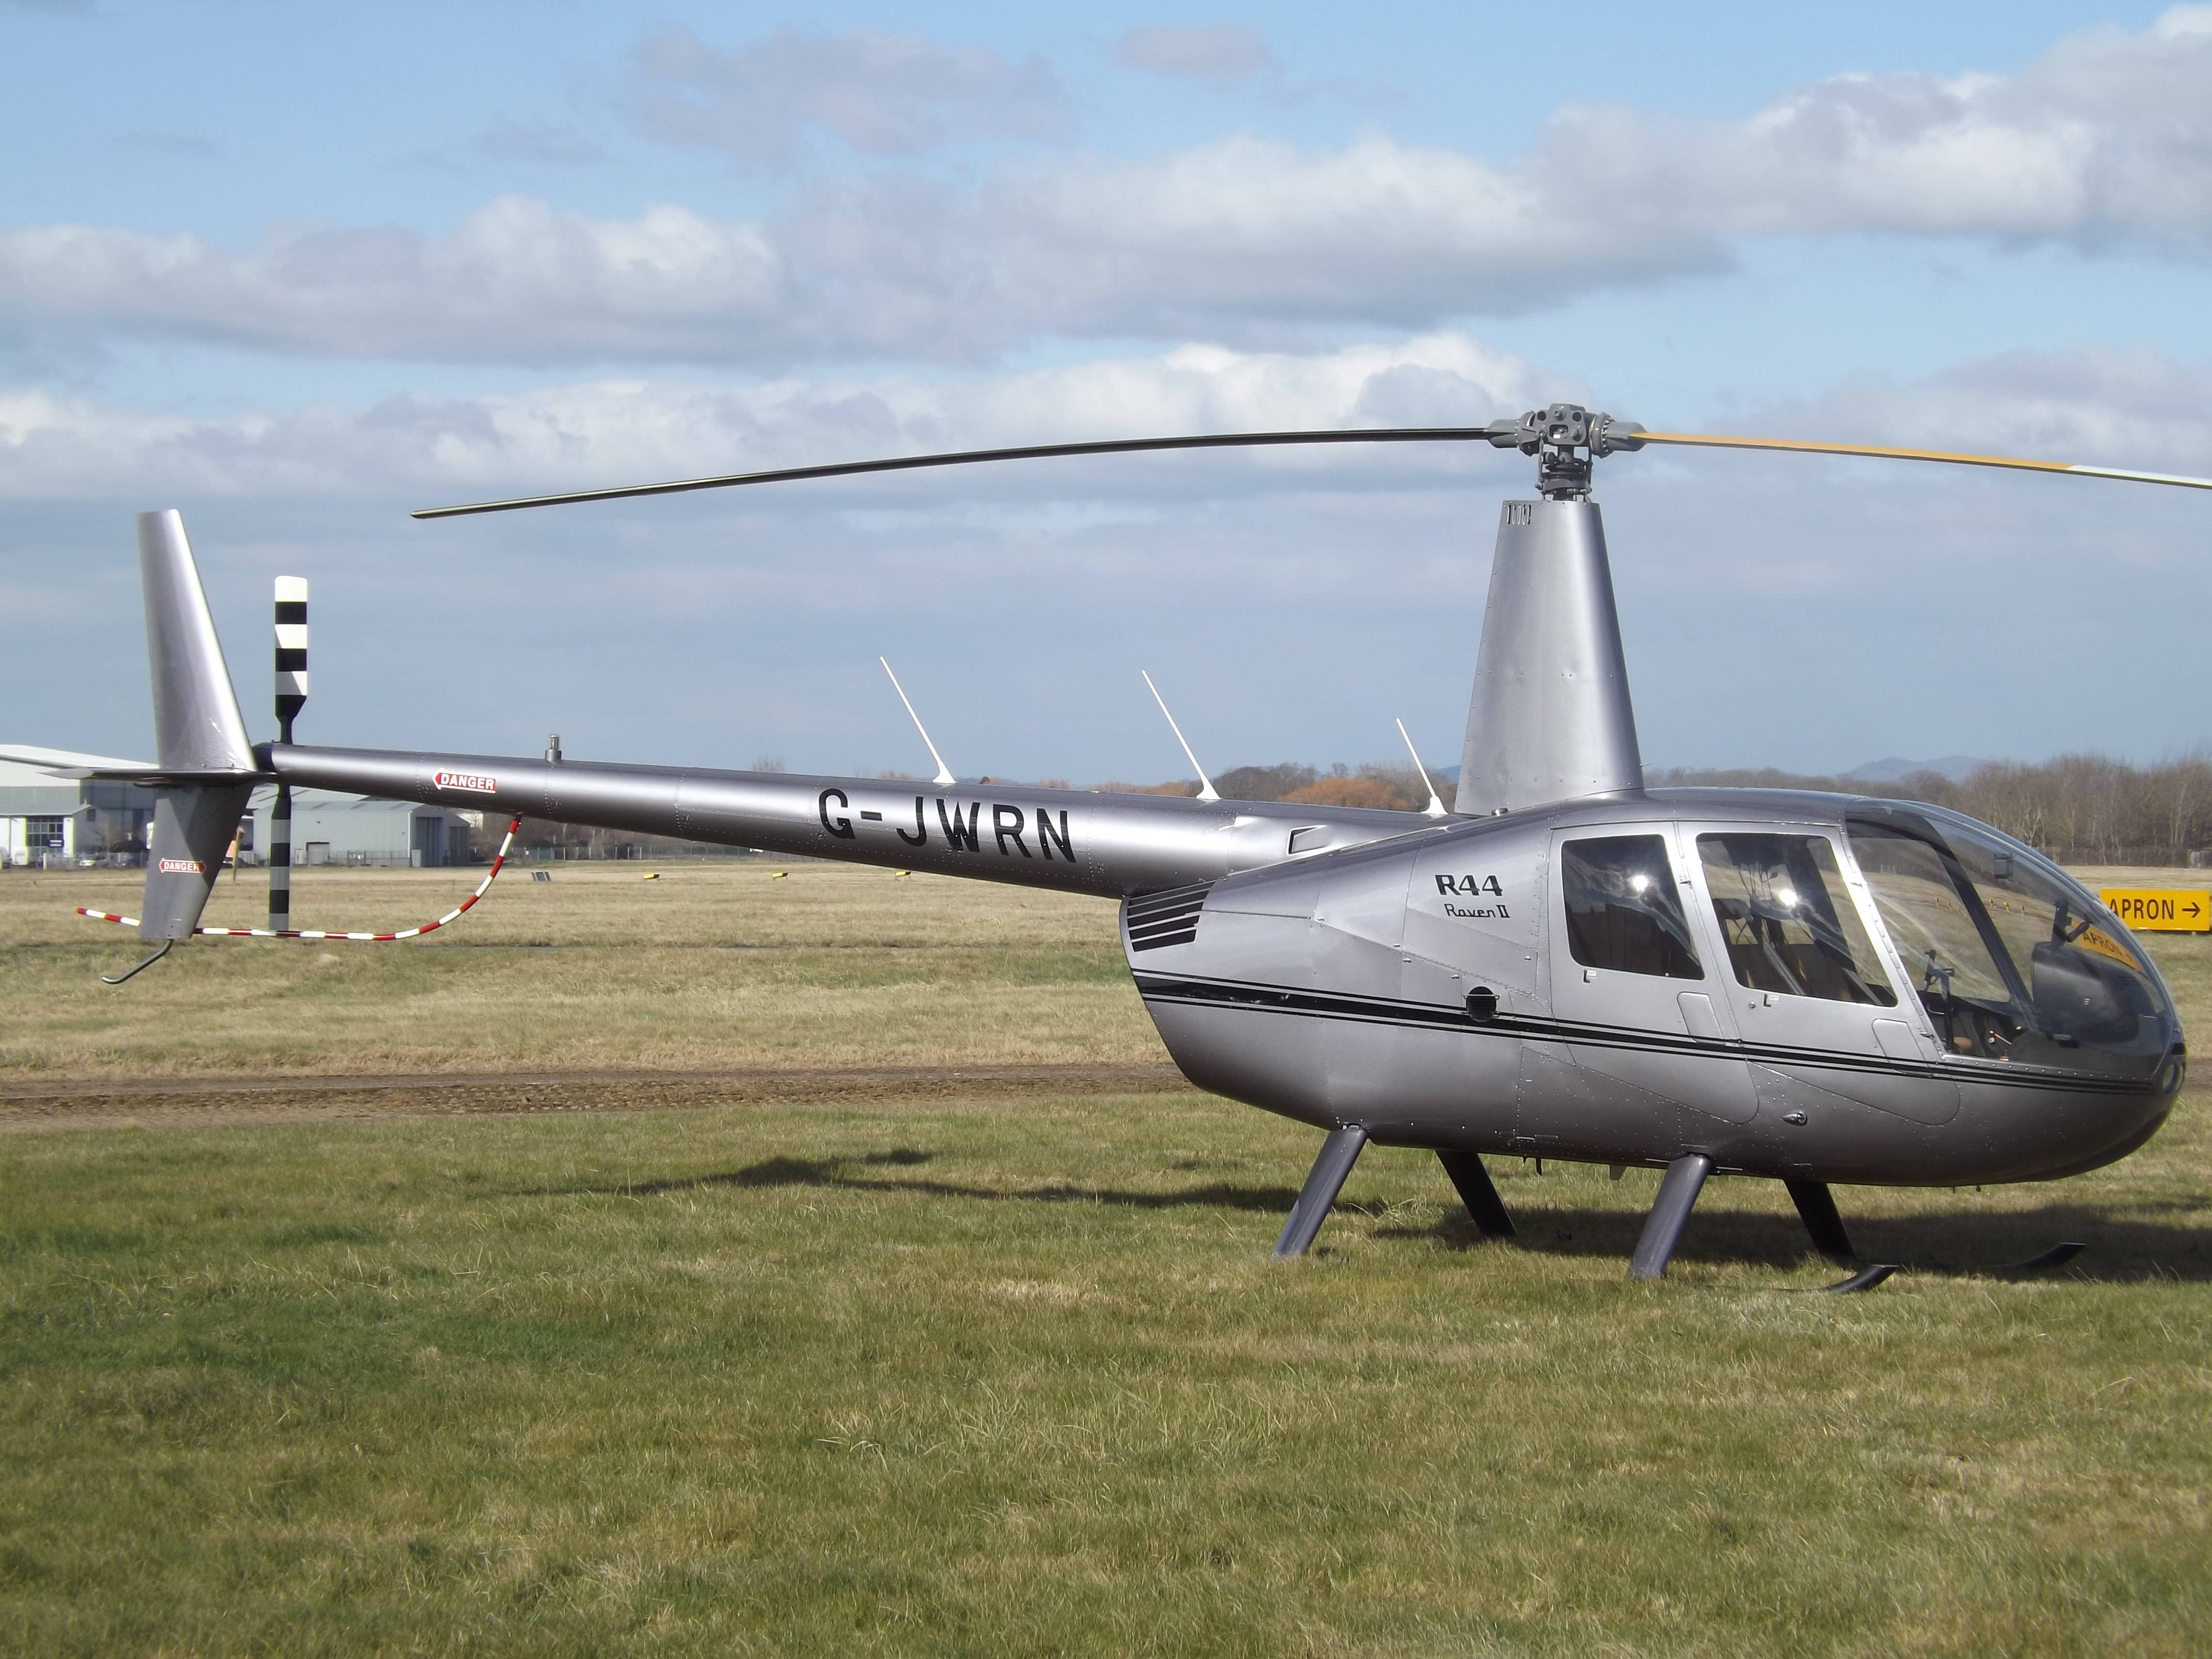 Safety Meets Innovation: Examining the State-of-the-Art Technology and Advanced Safety Systems of High-End Helicopters